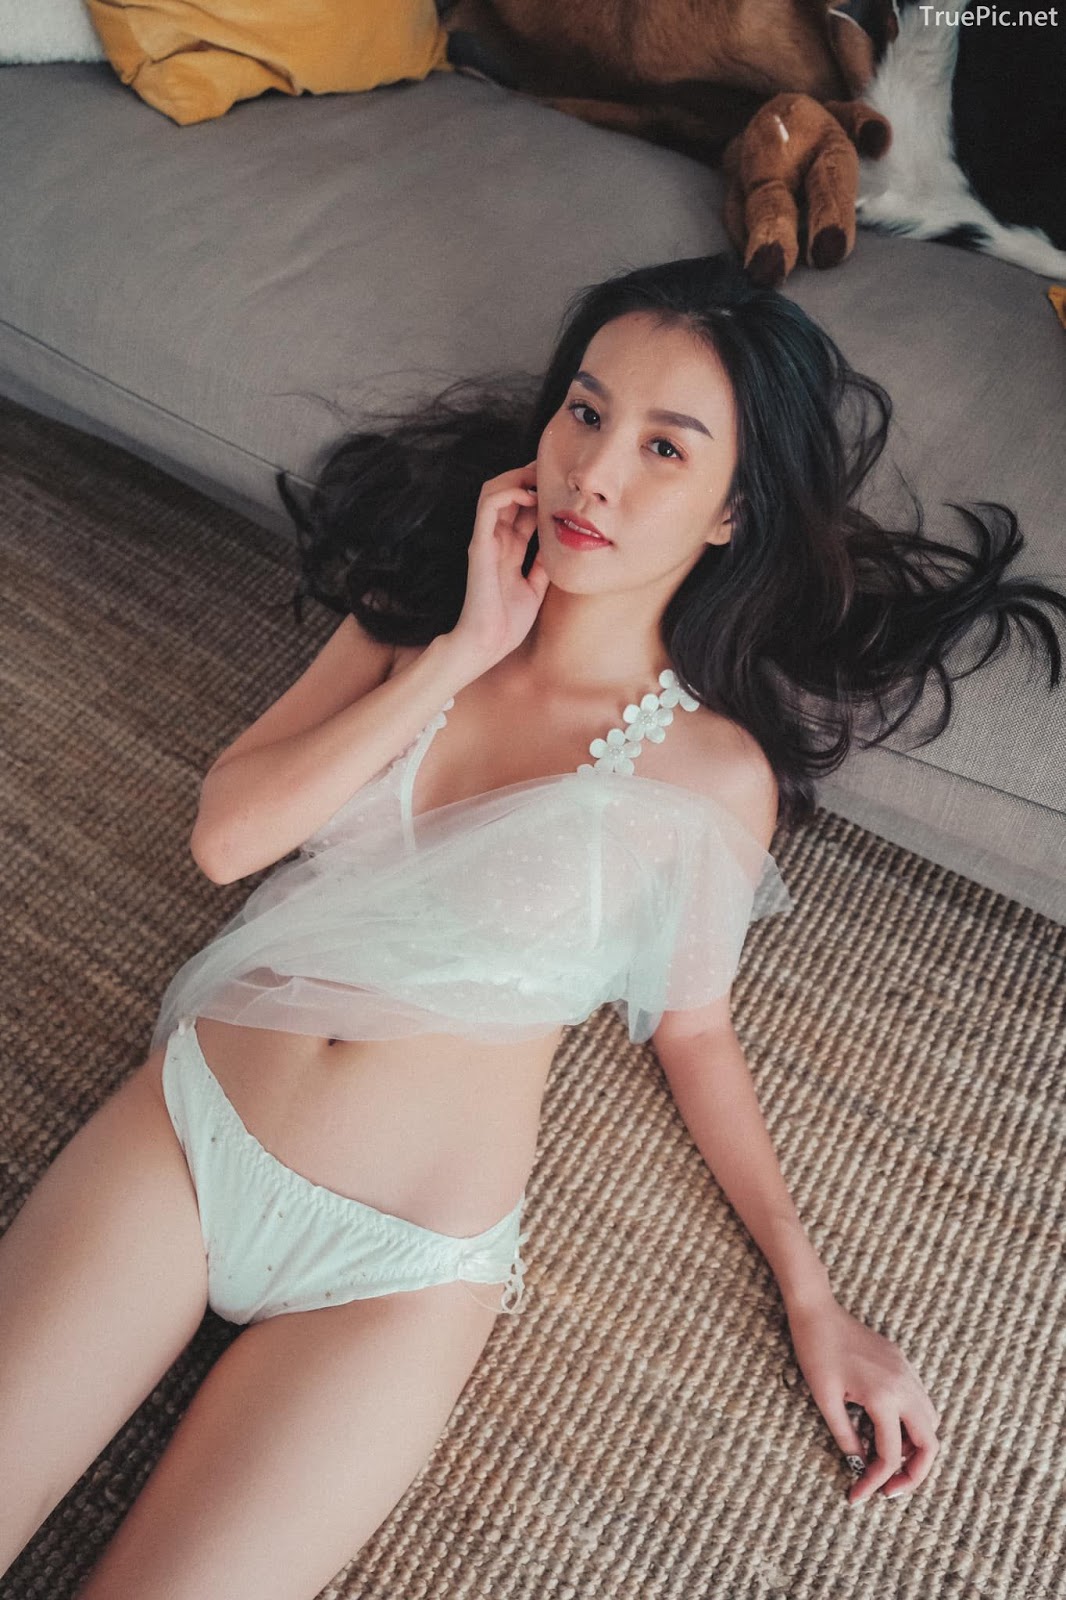 Thailand model - Ssomch Tanass - Sexy in Transparent Ultra-thin Lingerie - TruePic.net - Picture 21